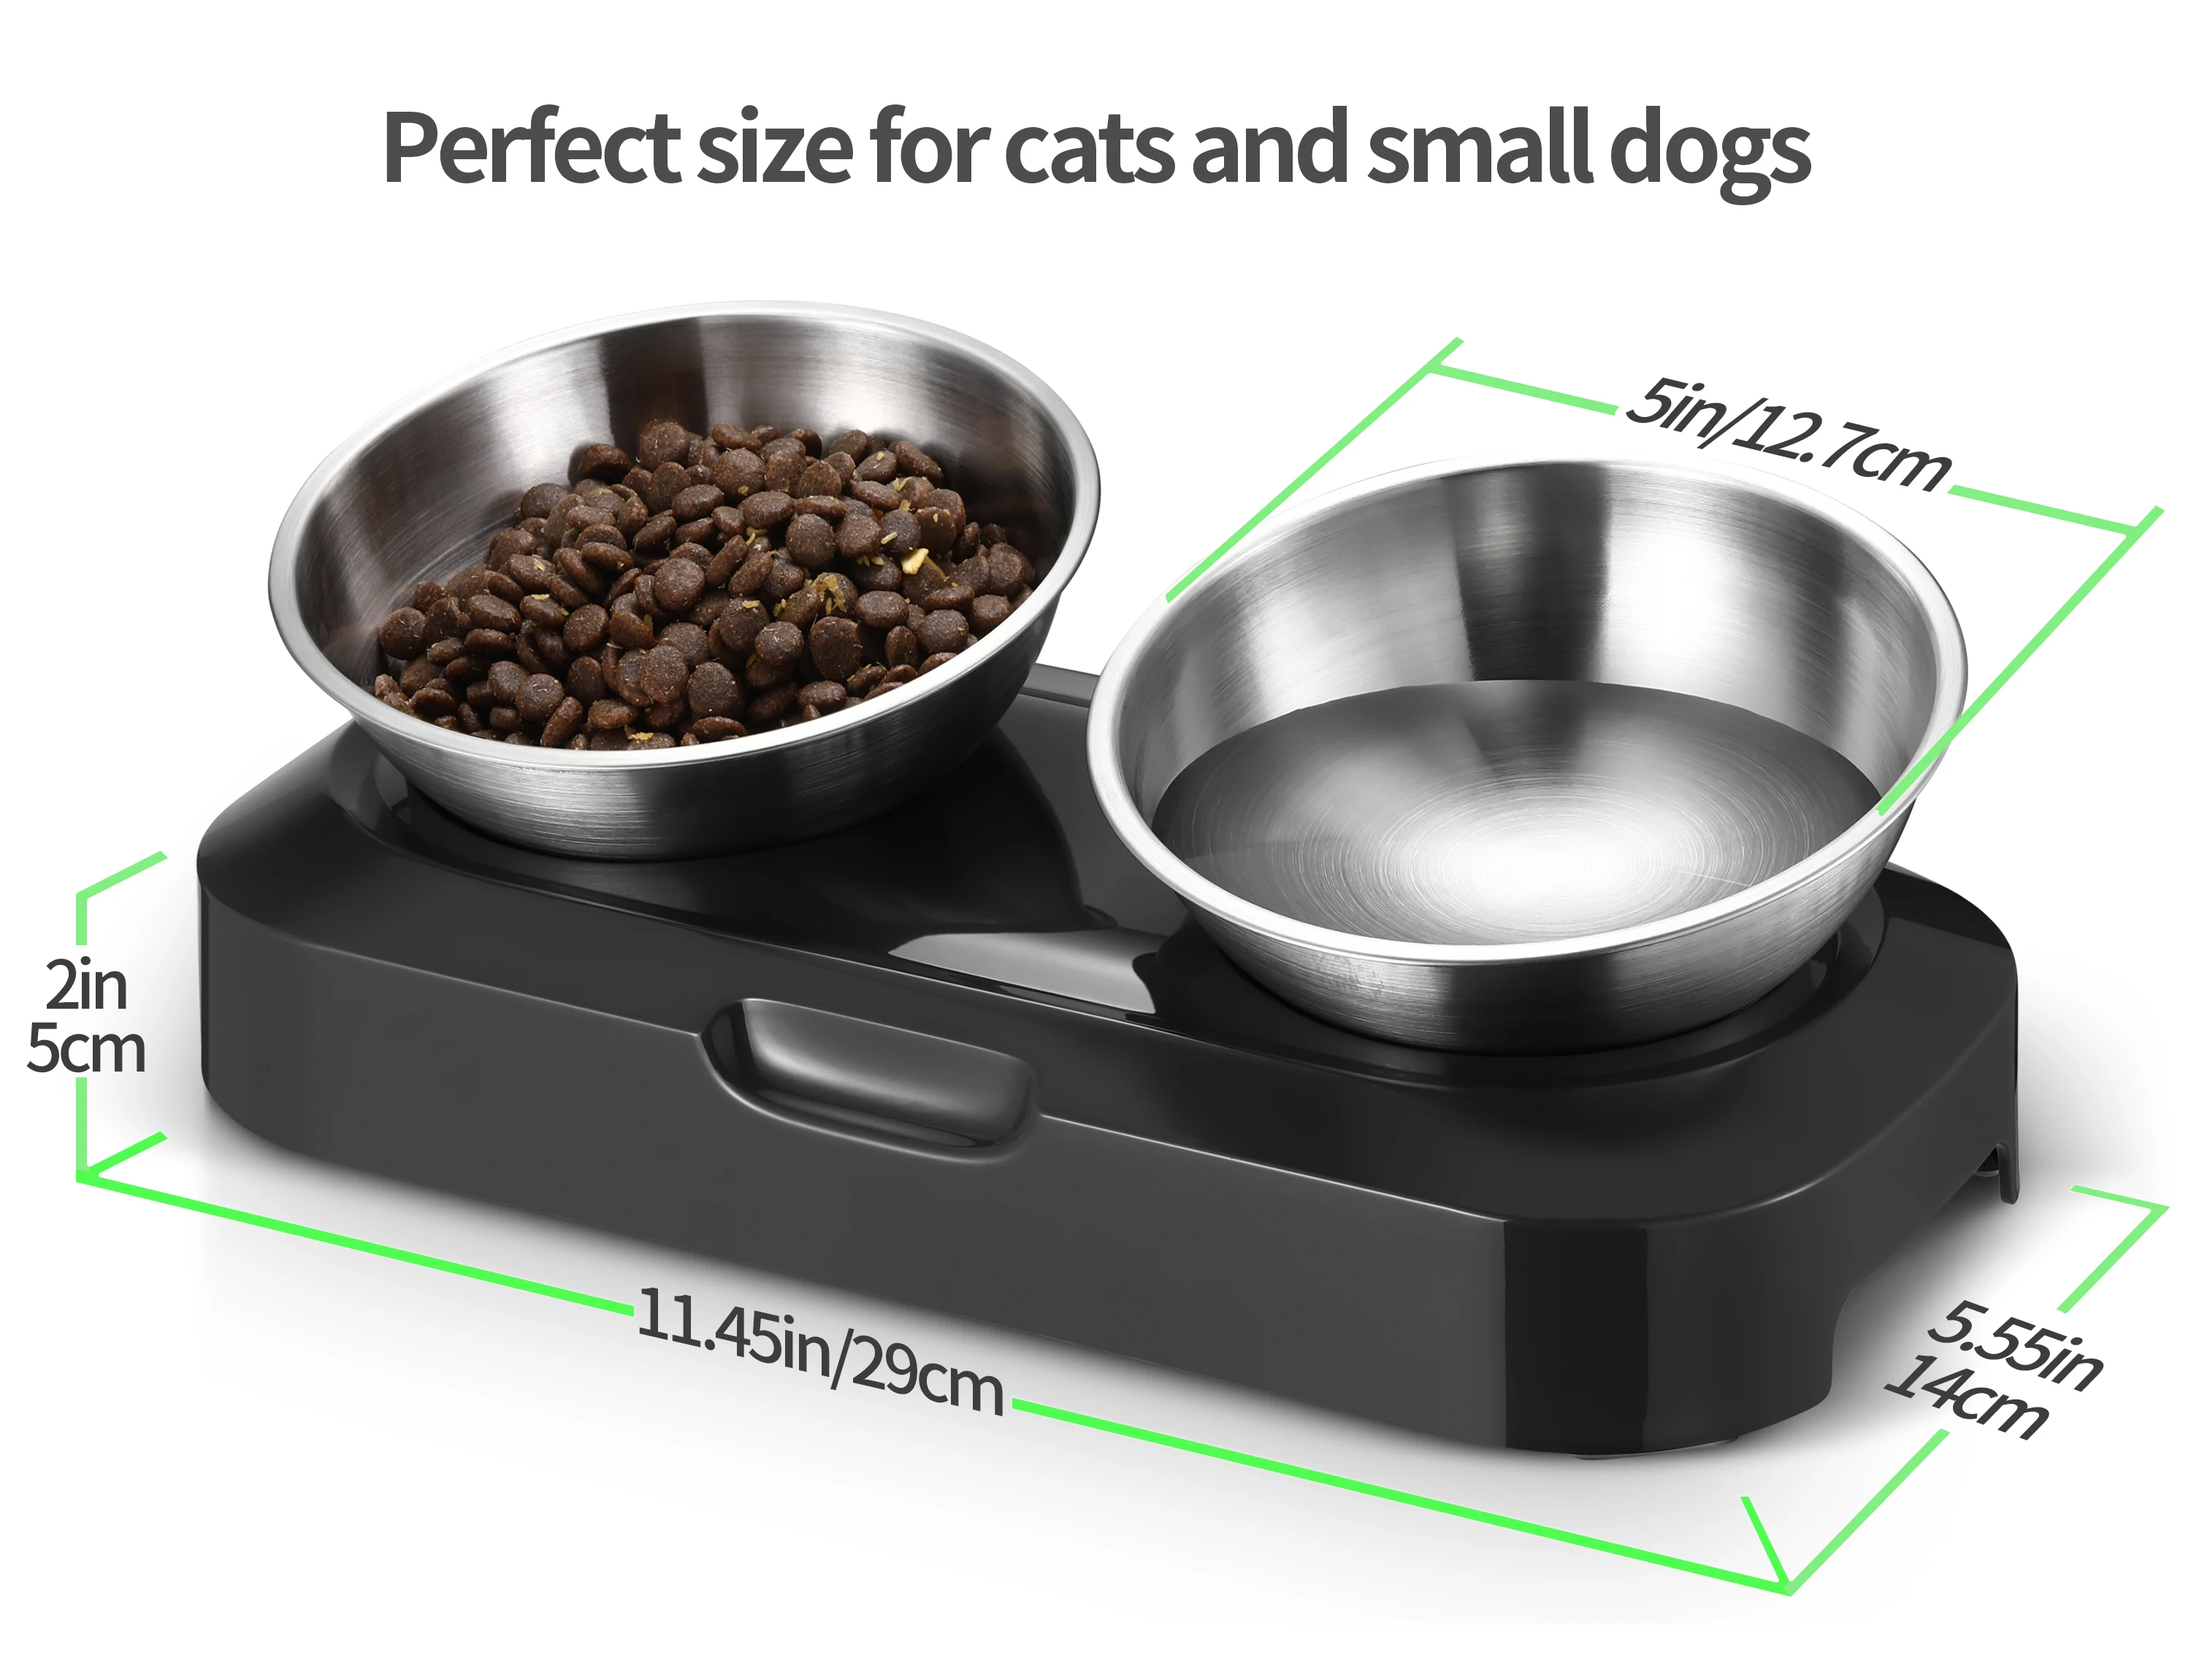 

Cat Food Bowl Whisker Friendly Stainless Steel Non Skid Dishwasher Safe May Also Prevent Acne The Original Whisker Relief